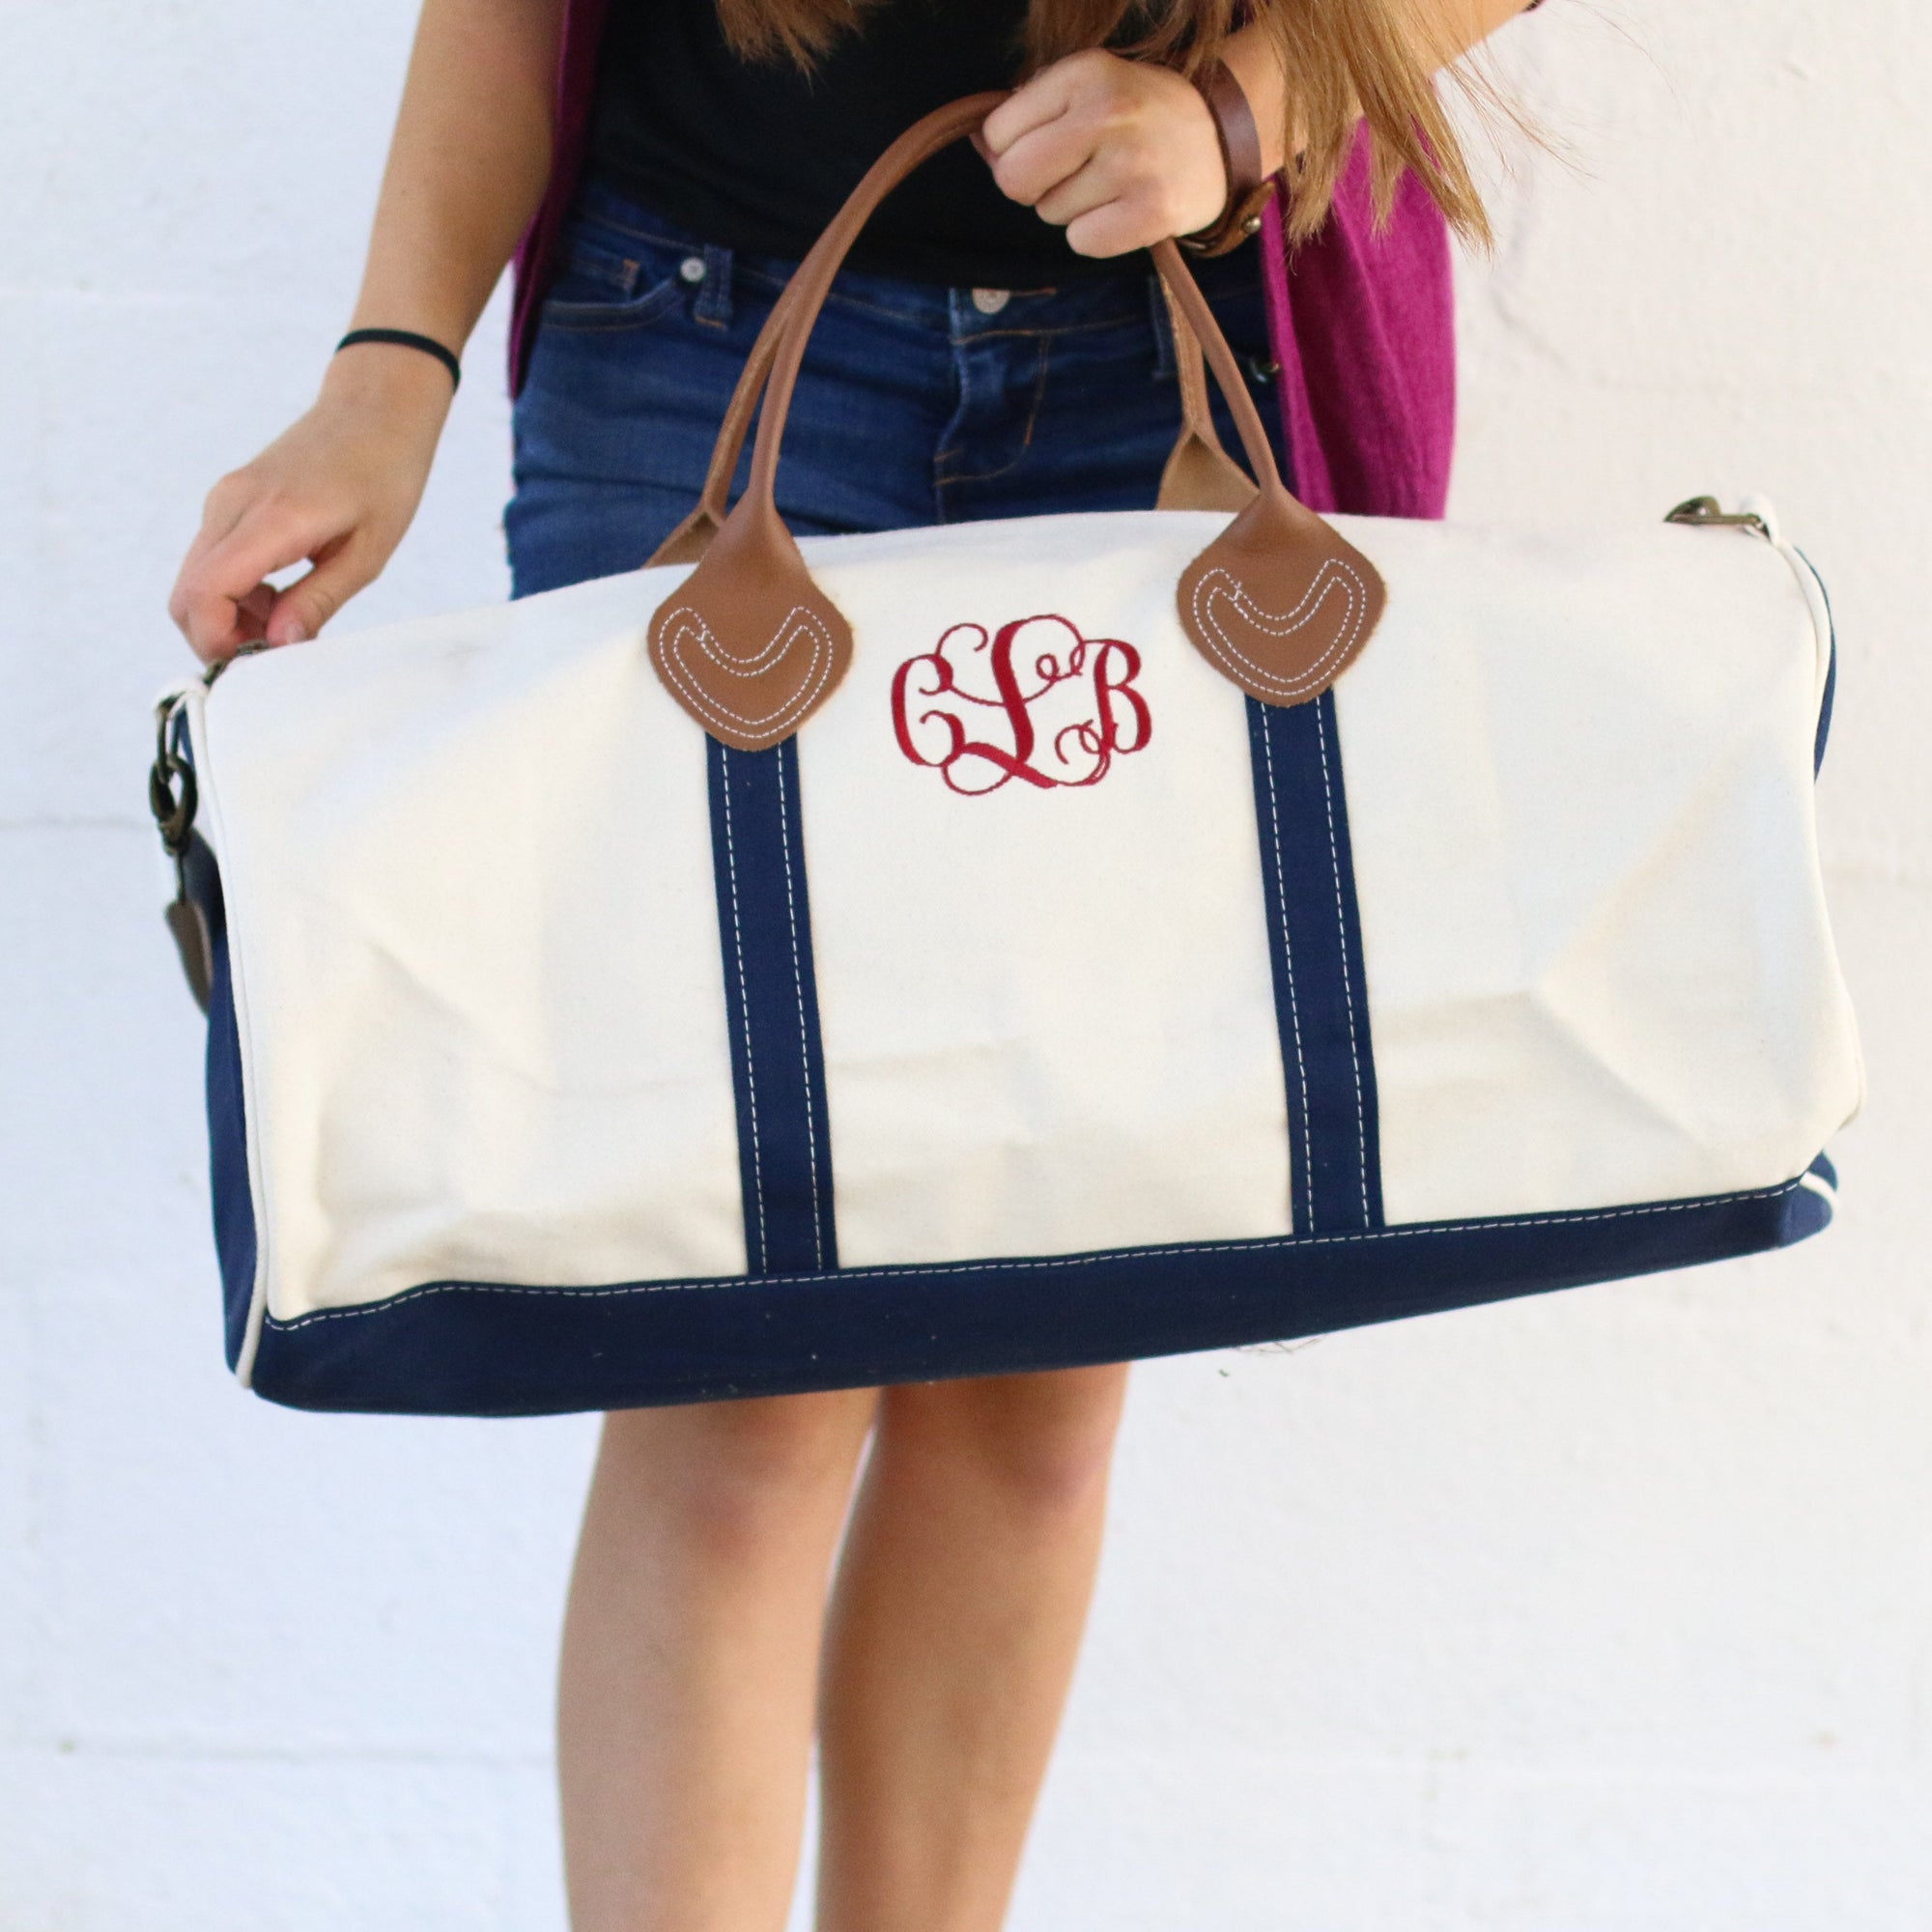 white and navy round duffel bag with personalized initials